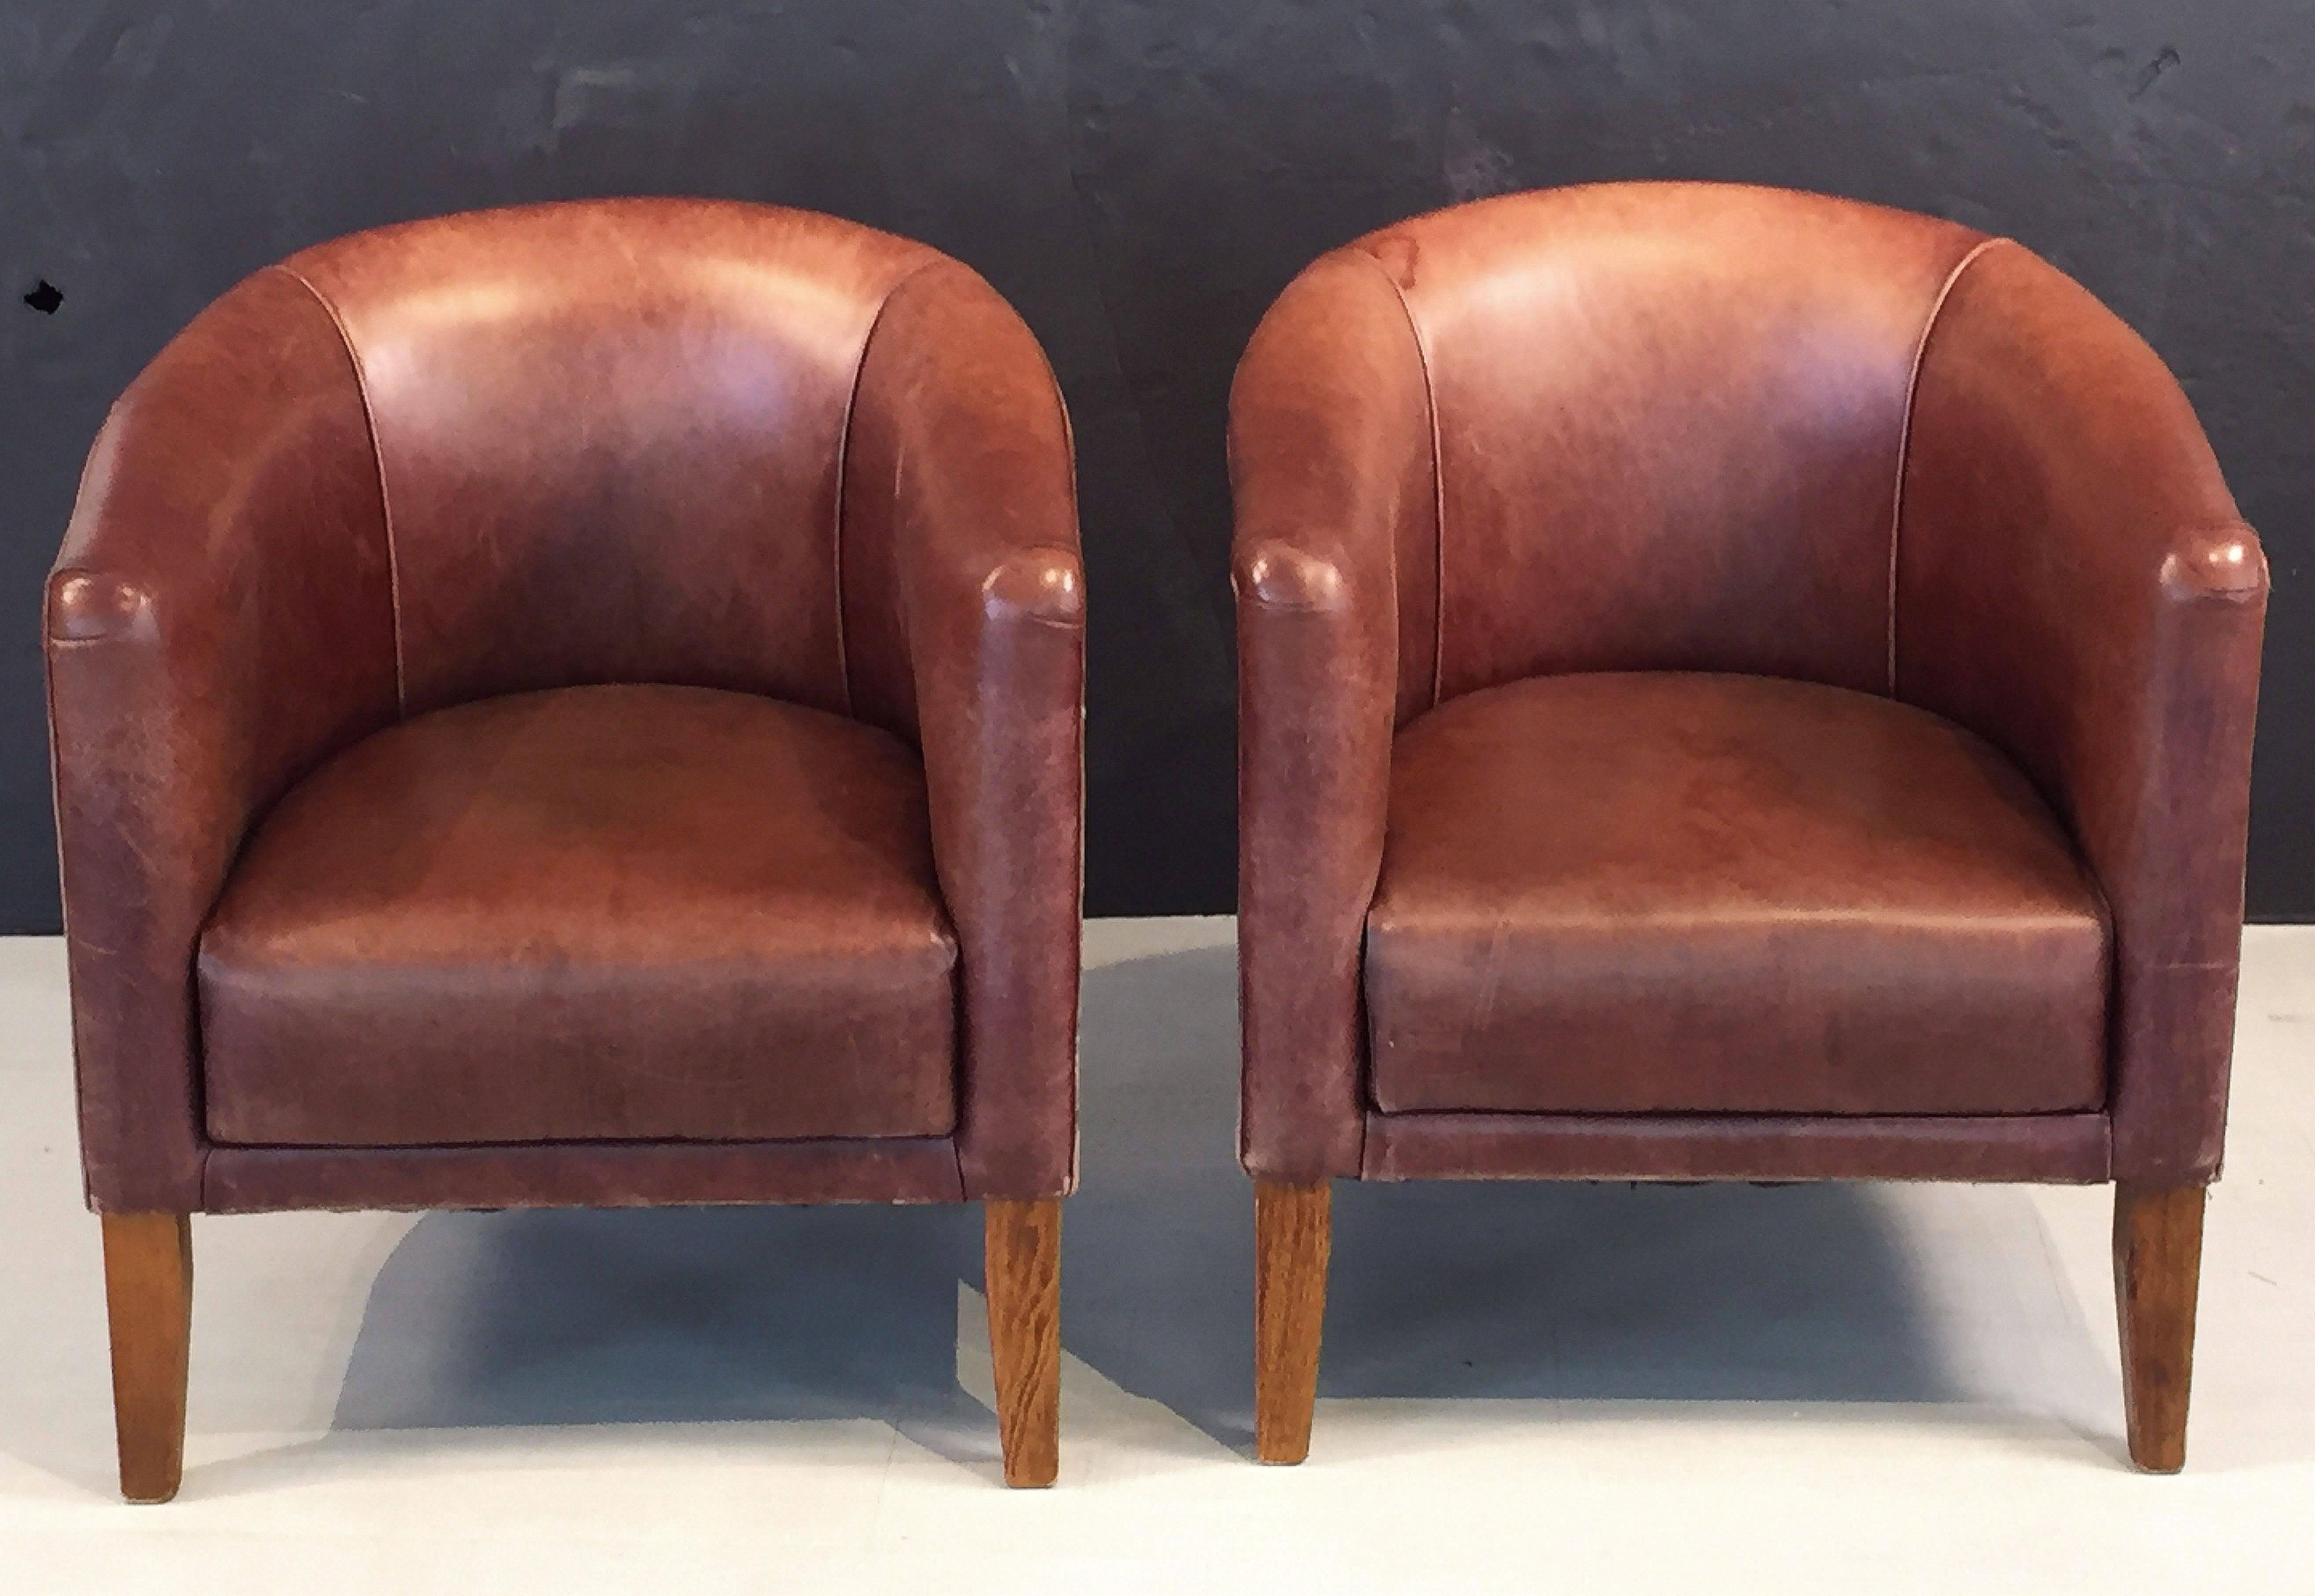 A fine pair of Italian leather lounge or club chairs, each chair featuring a comfortable upholstered seat and back with a barrel-style design, set upon four legs.

Priced individually - $3895 each chair.